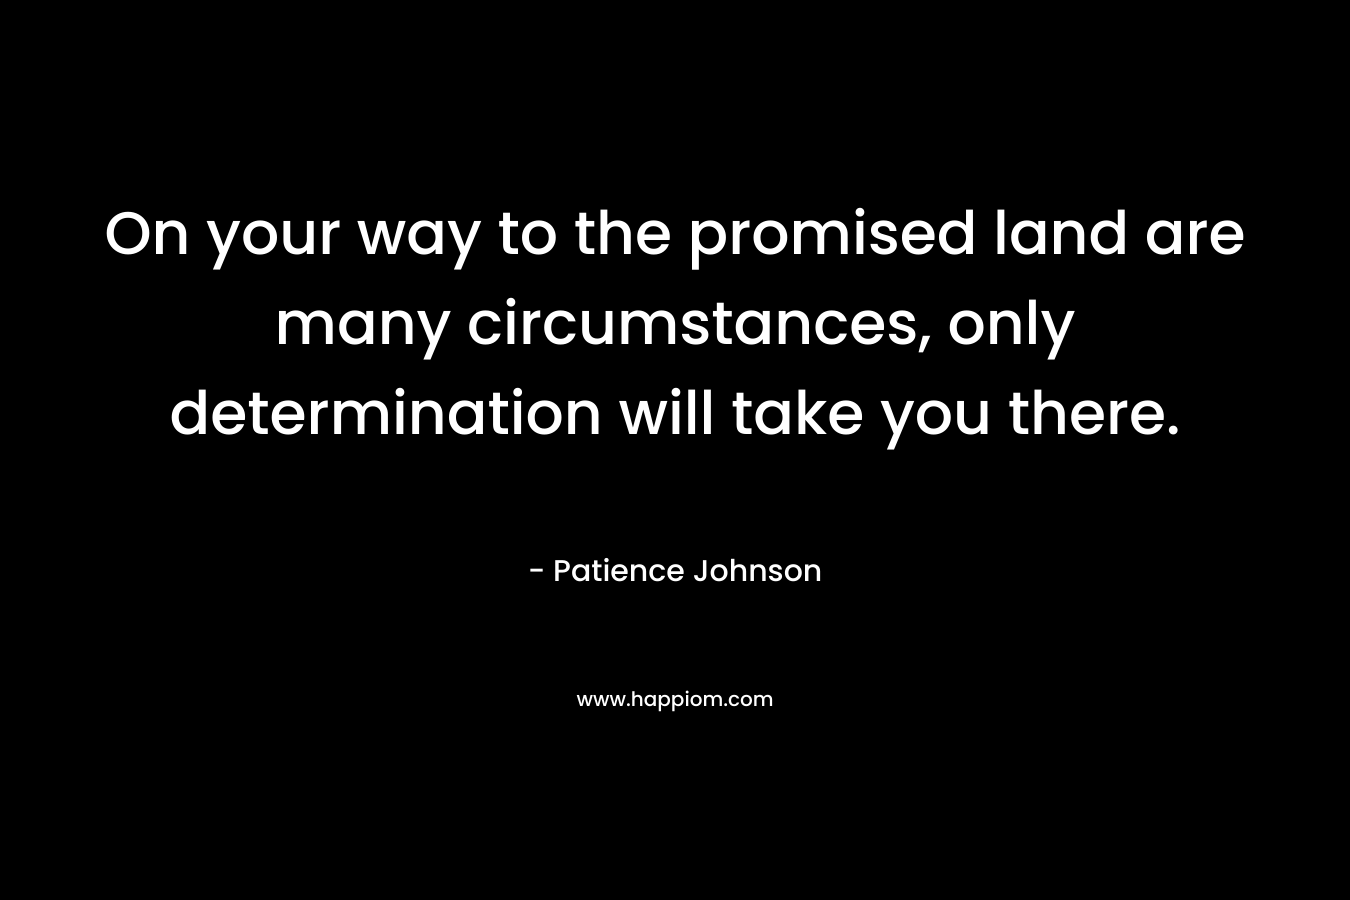 On your way to the promised land are many circumstances, only determination will take you there. – Patience Johnson